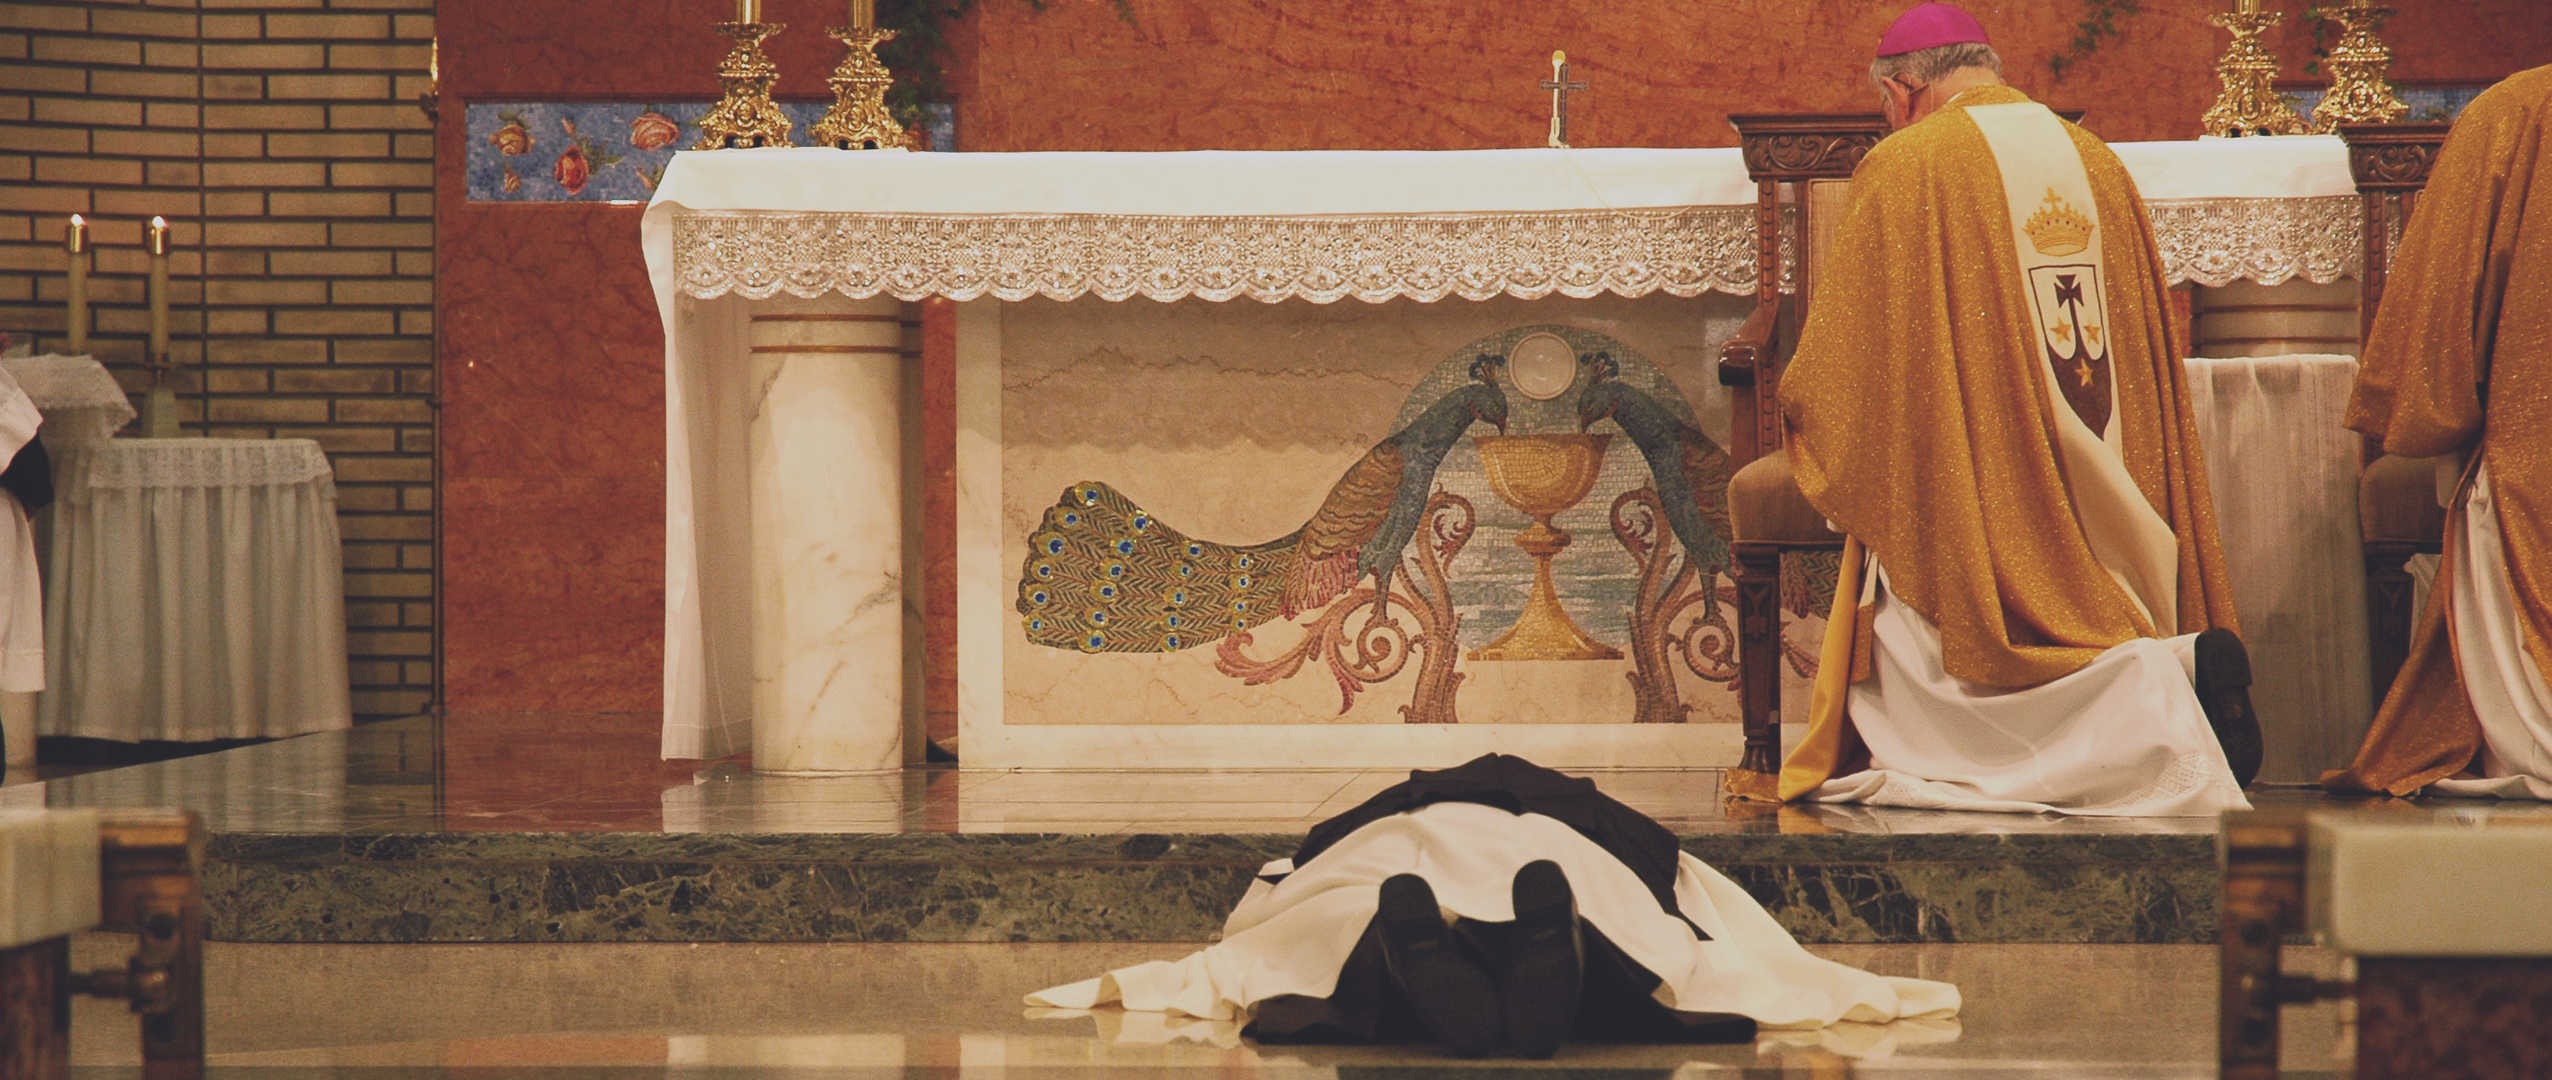 Sister laying prostrate in front of altar with bishop kneeling